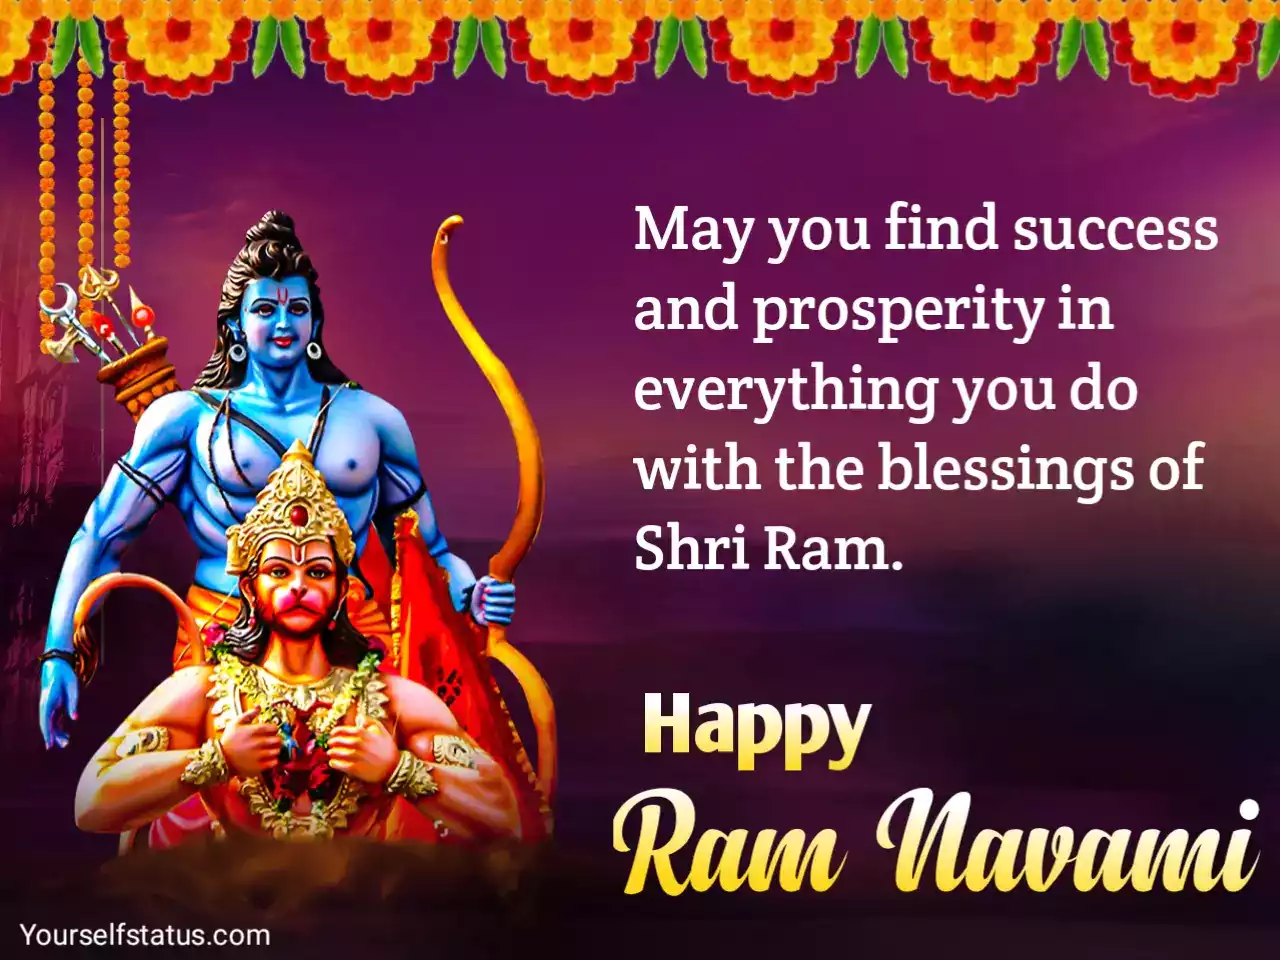 Ram navami wishes images in english